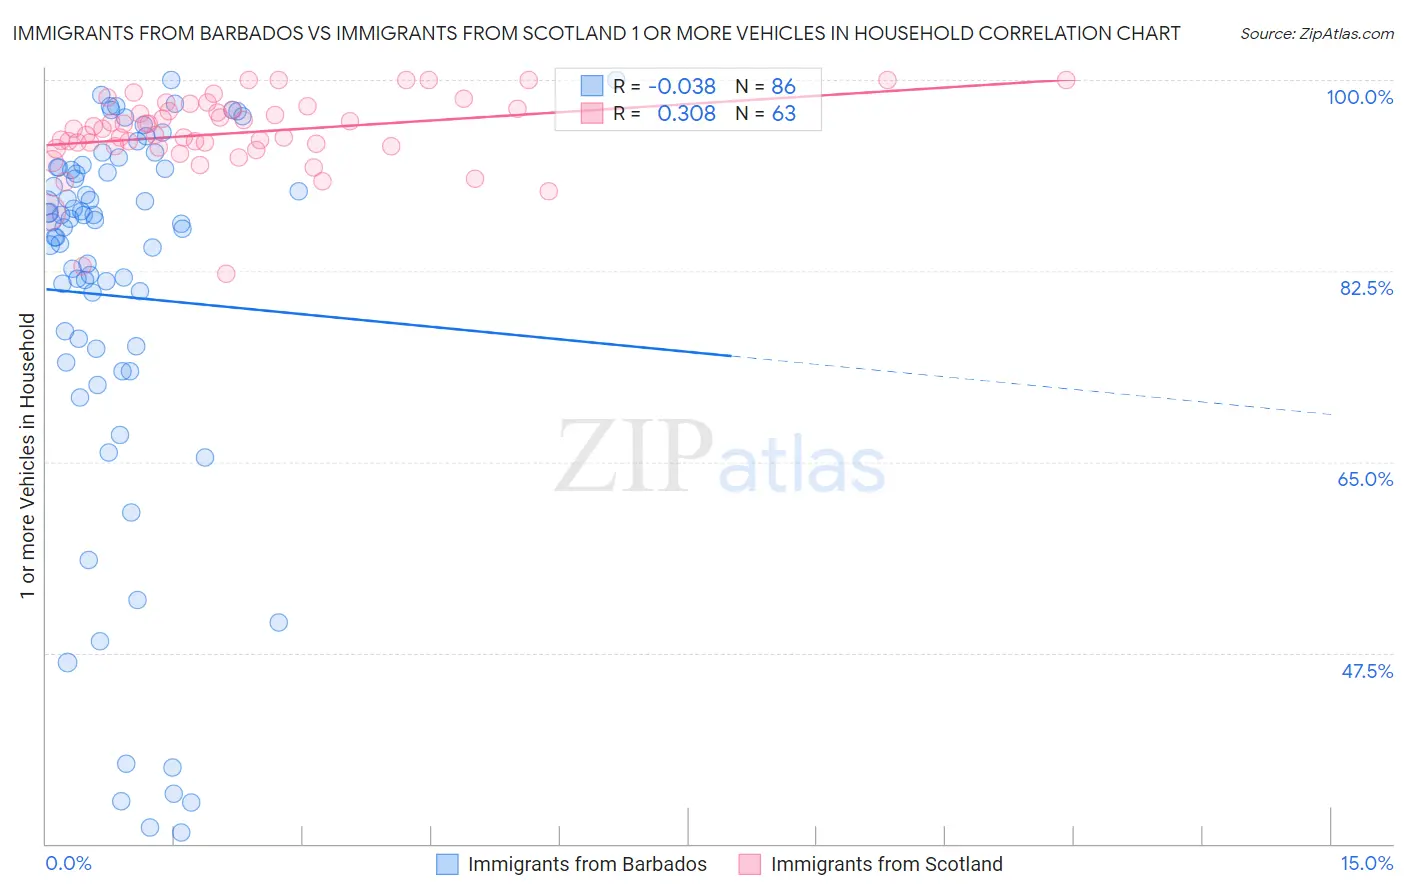 Immigrants from Barbados vs Immigrants from Scotland 1 or more Vehicles in Household